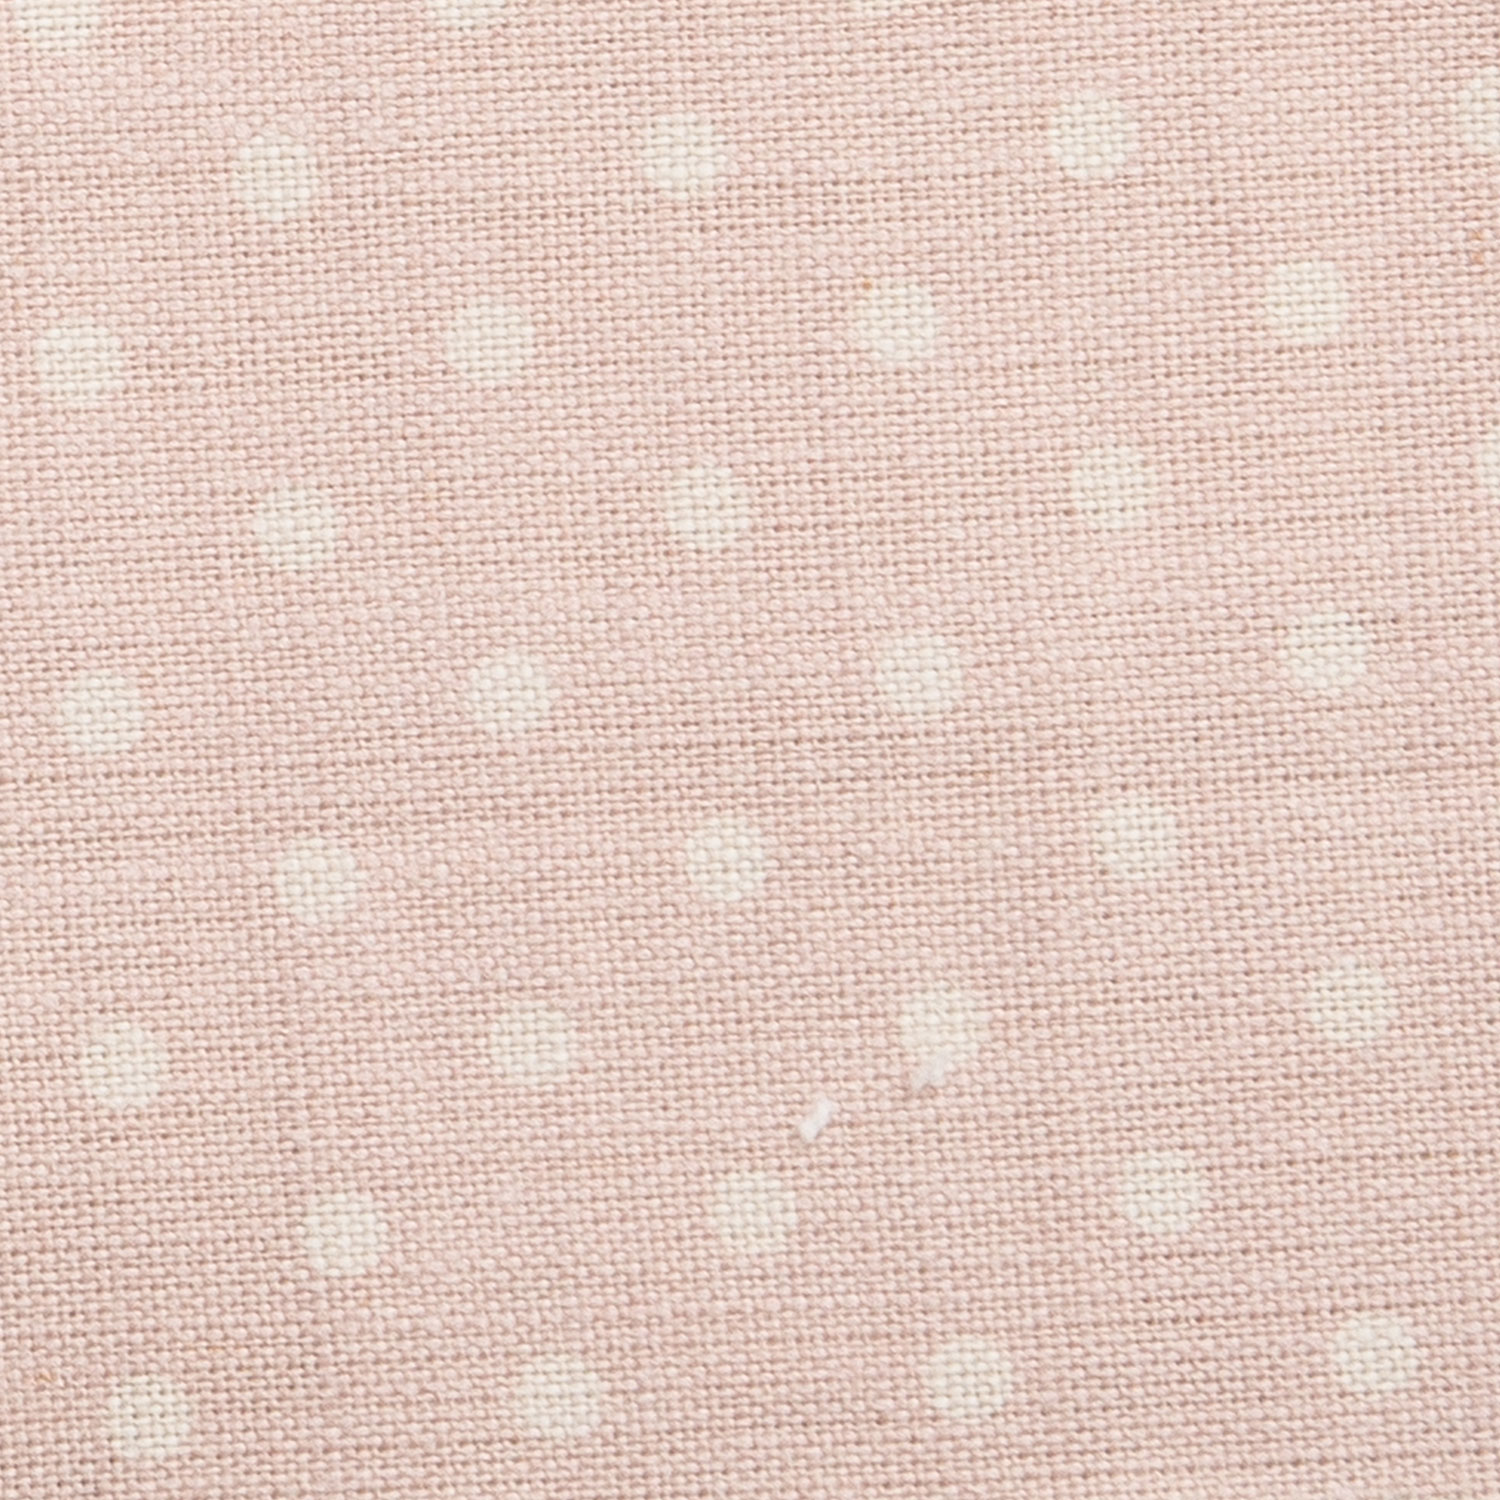 Polka, Pale Pink Icing Background